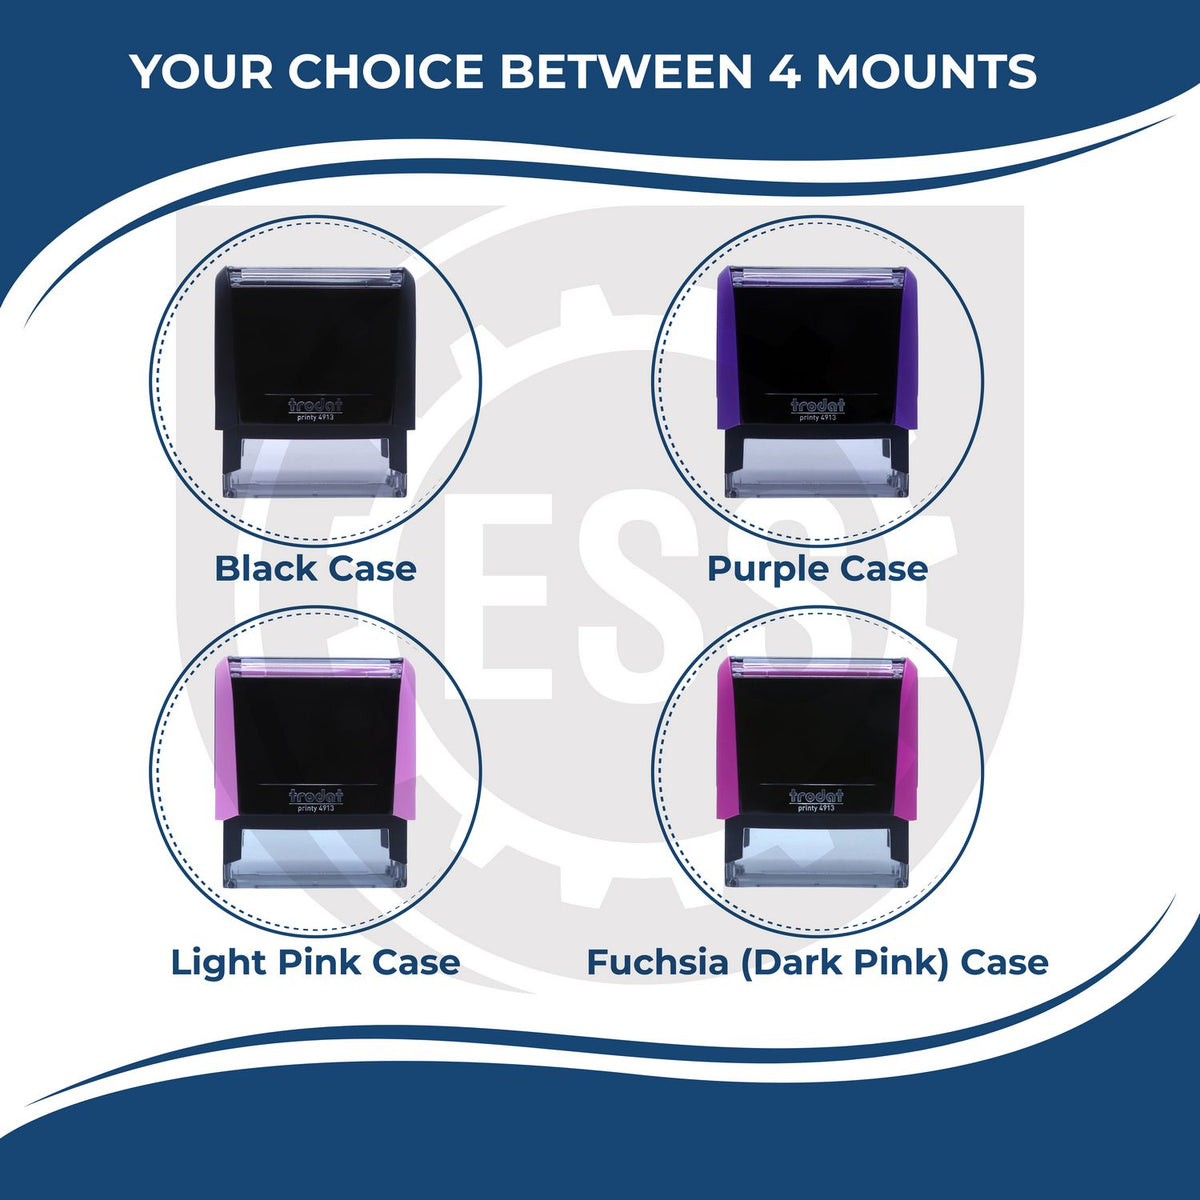 A picture of different colored mounts for the Self-Inking Rectangular South Dakota Notary Stamp featurning a Red, Blue or Black Mount